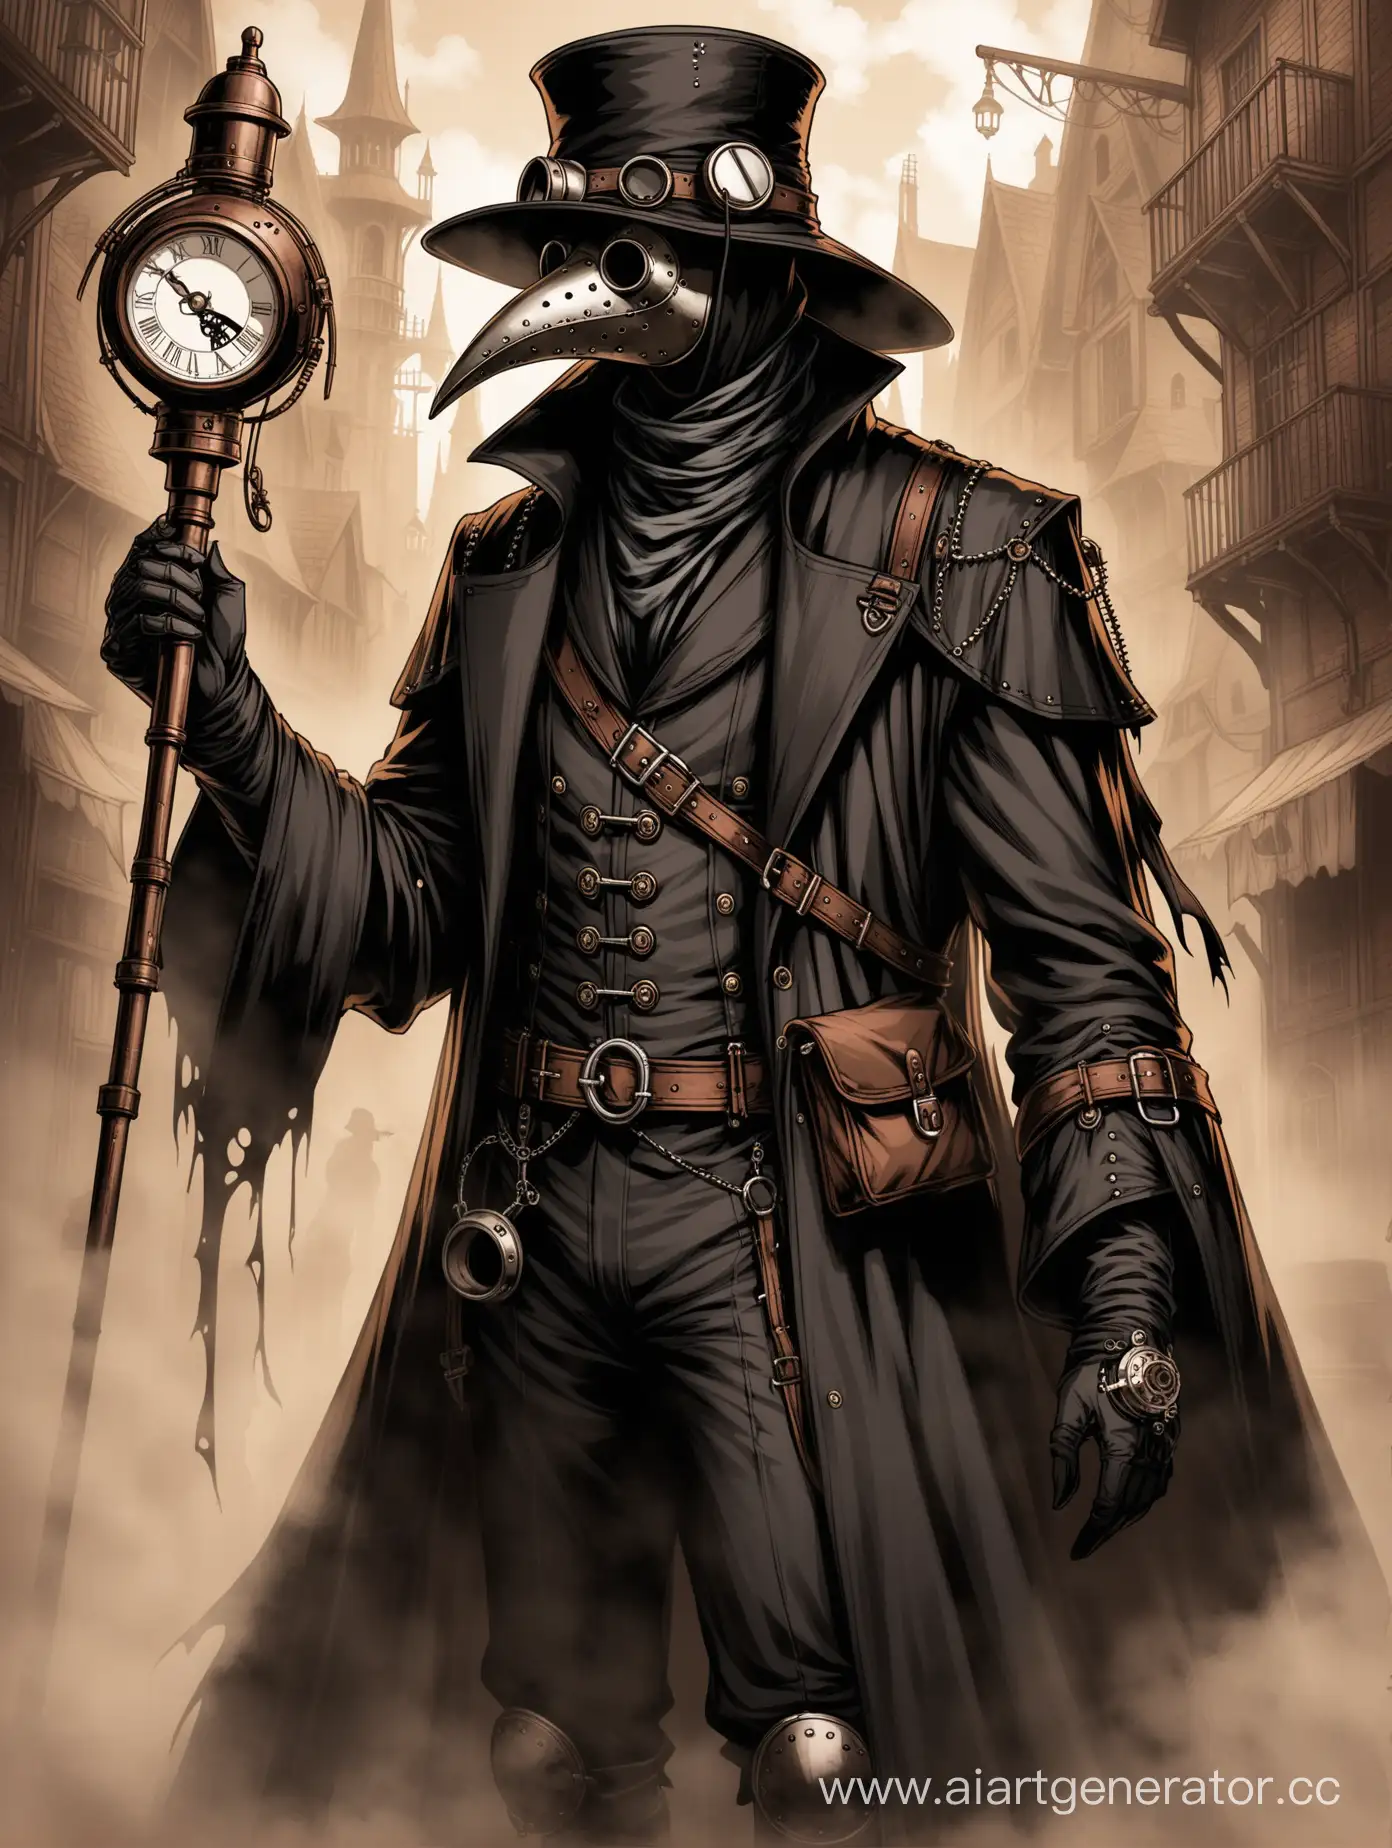 The man in the plague Doctor's outfit steampunk 